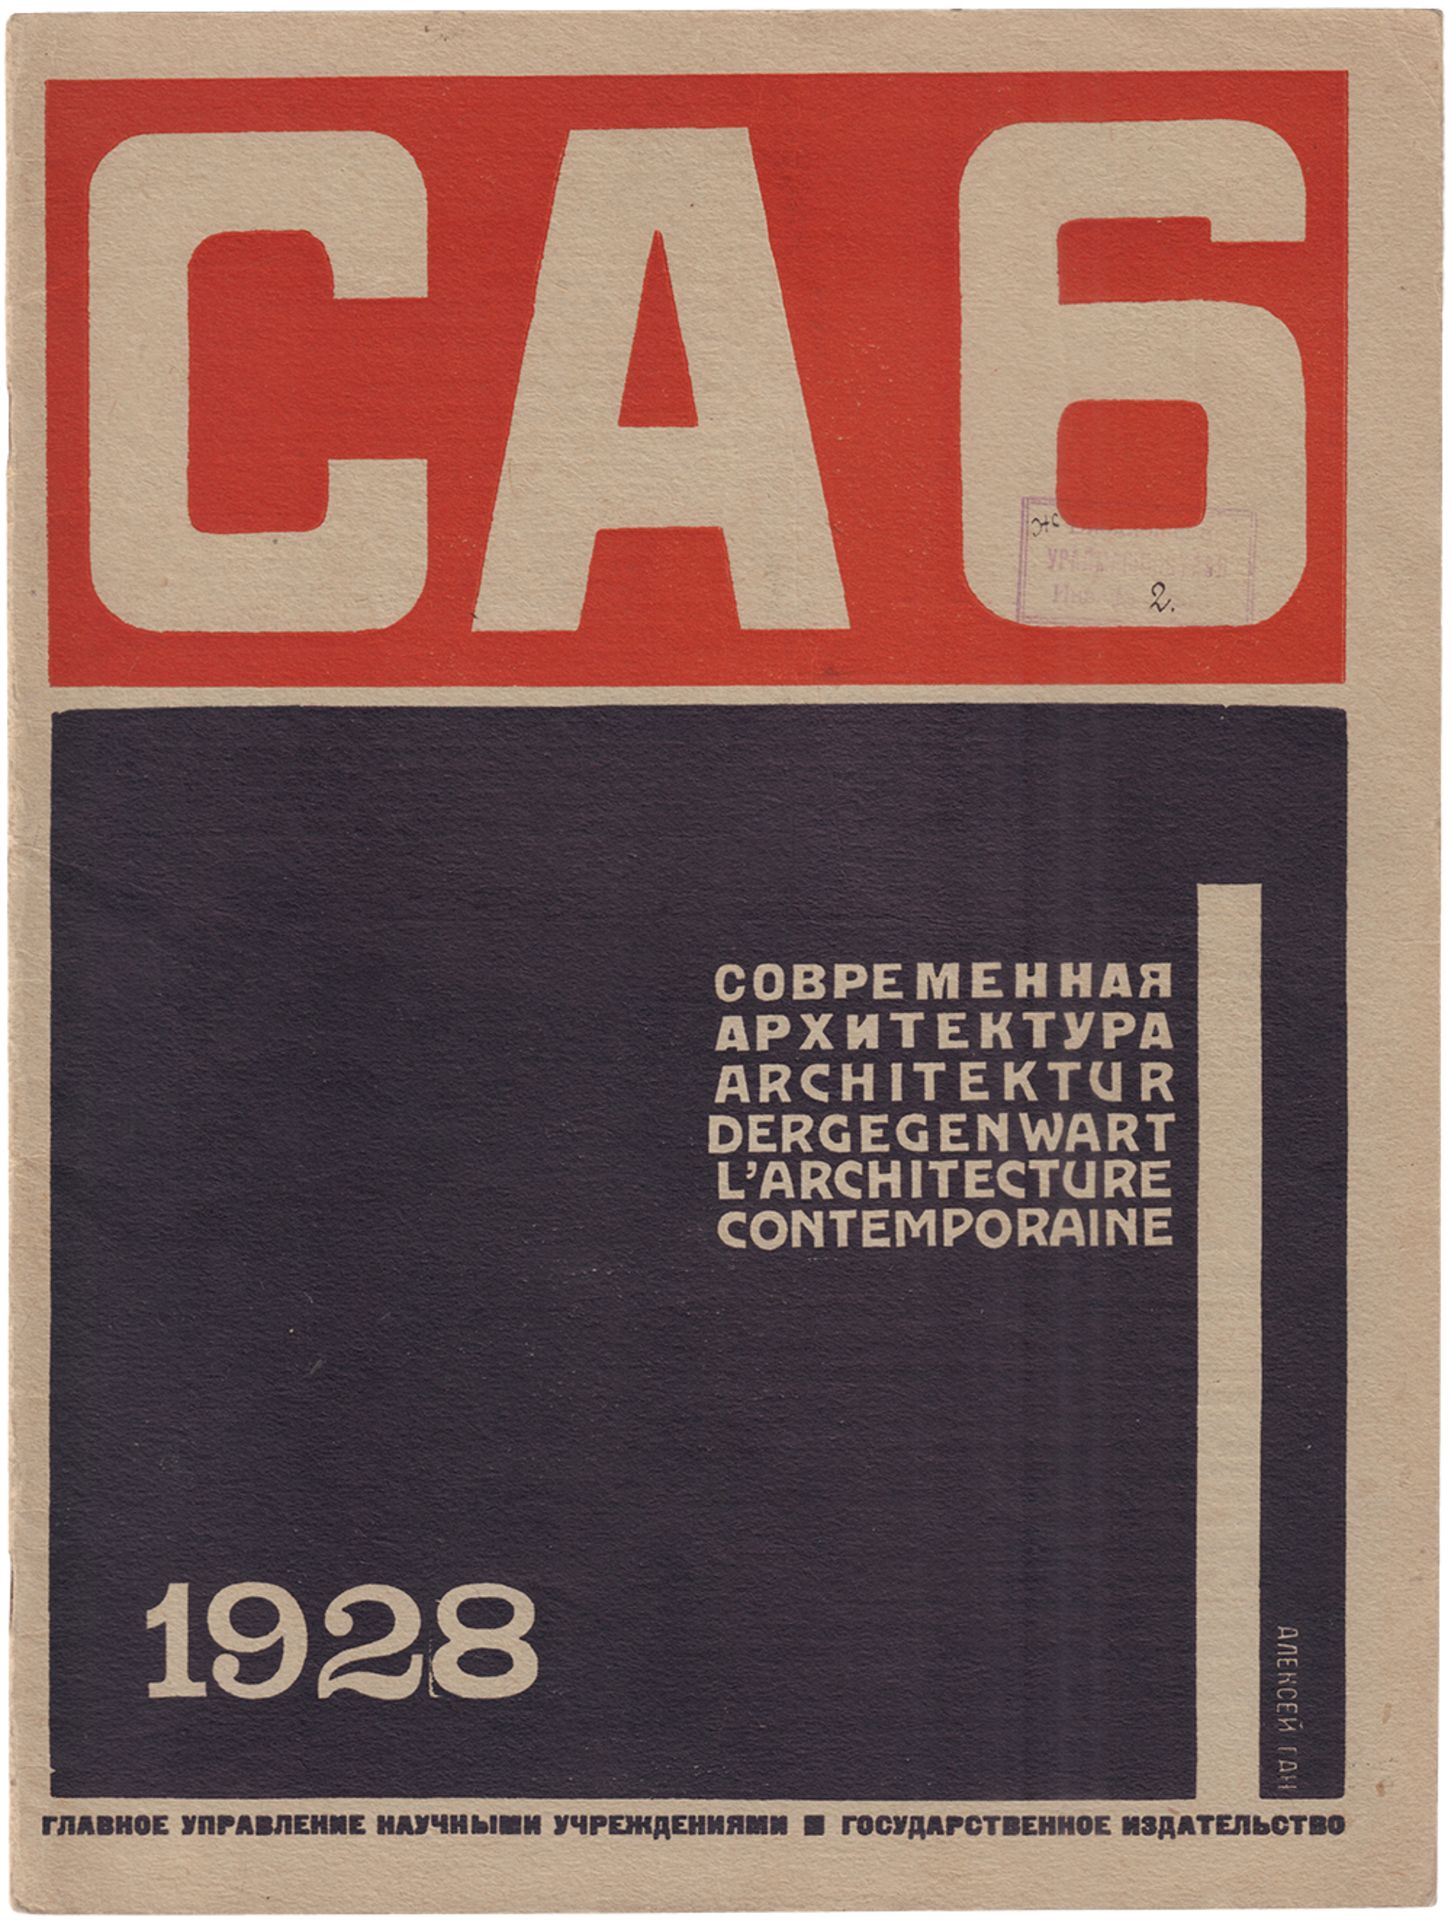 [Gan, A. design. Soviet art]. Modern architecture. Issue 6, 1928. 169-200 pp.: ill., diagrams, table